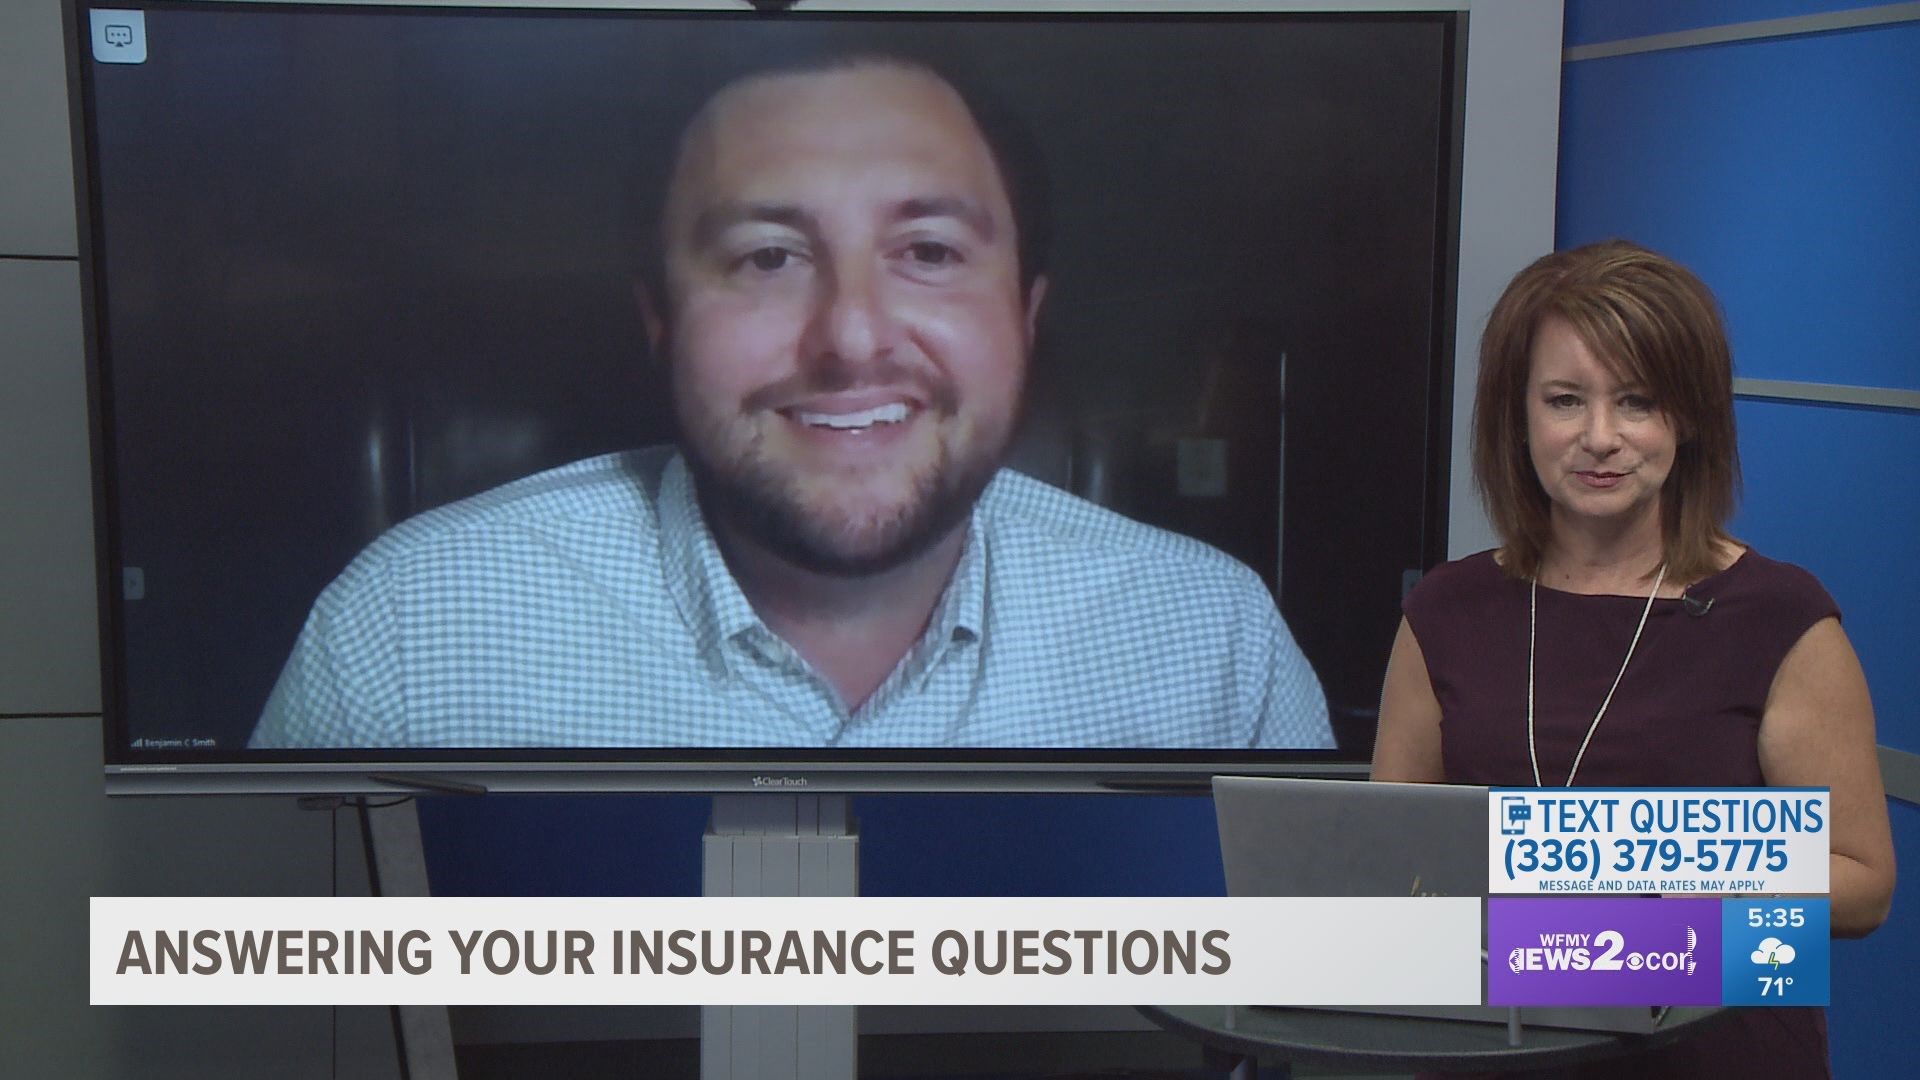 Chase Smith with Alliance Insurance joins us to answer your questions about your insurance questions.